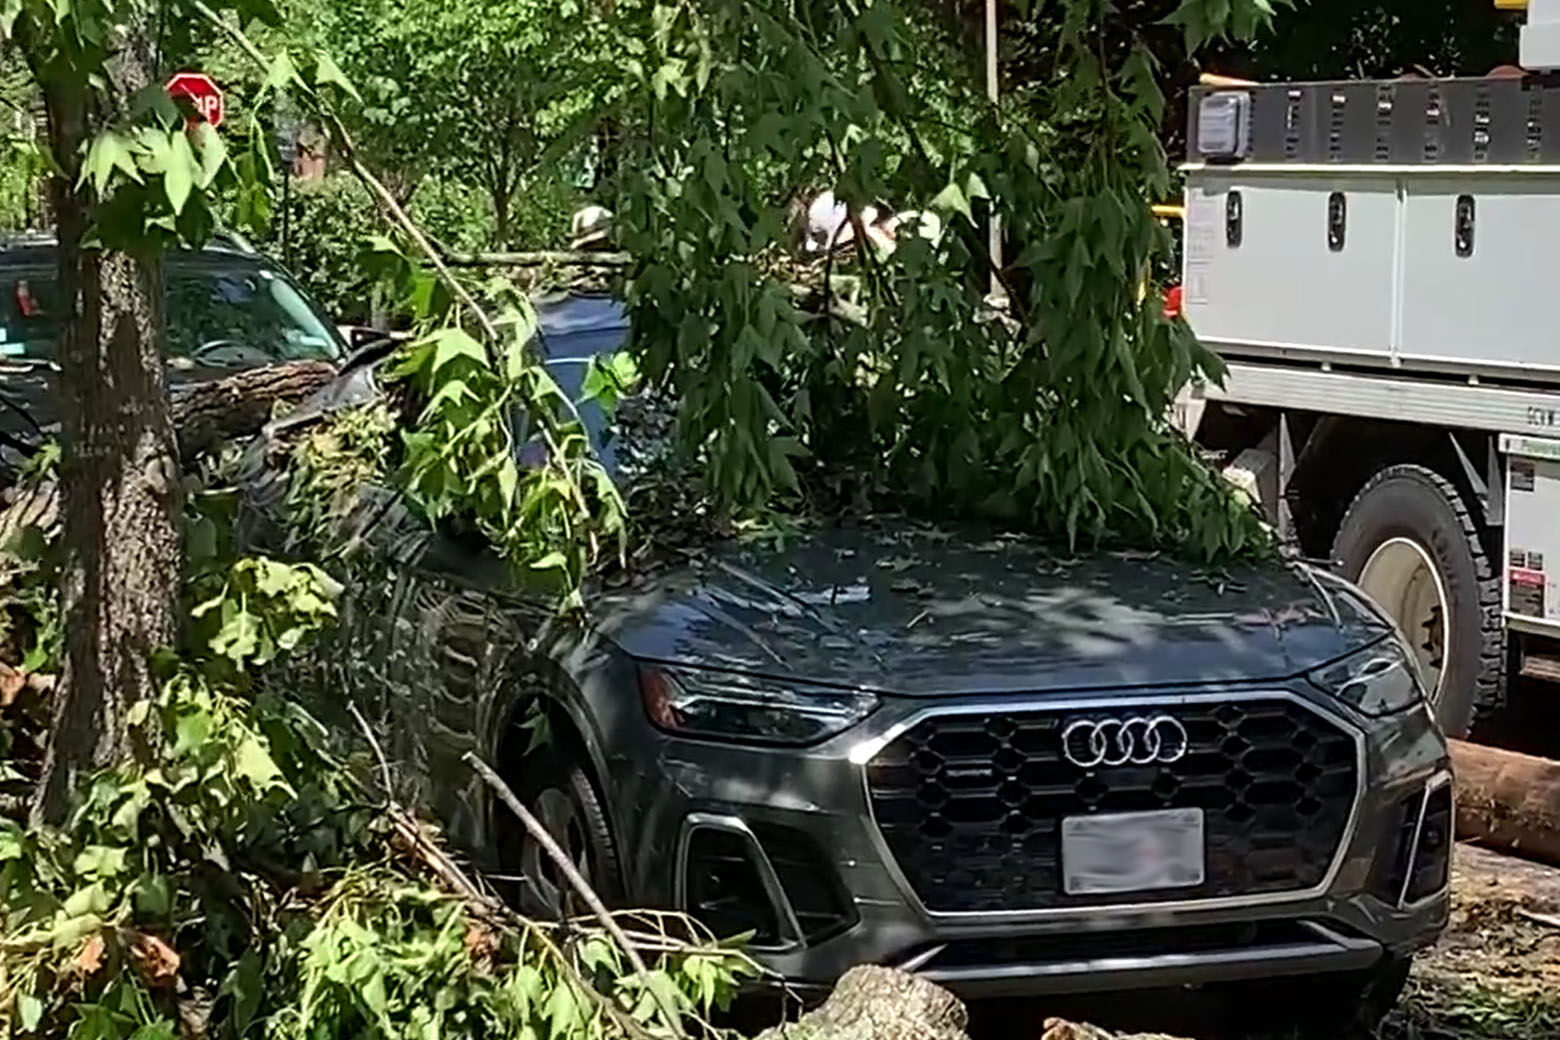 The D.C. region continues to recover after a severe storm ripped through the area on Saturday, toppling trees, and knocking out power for thousands across the area. (WTOP/Mike Murillo)